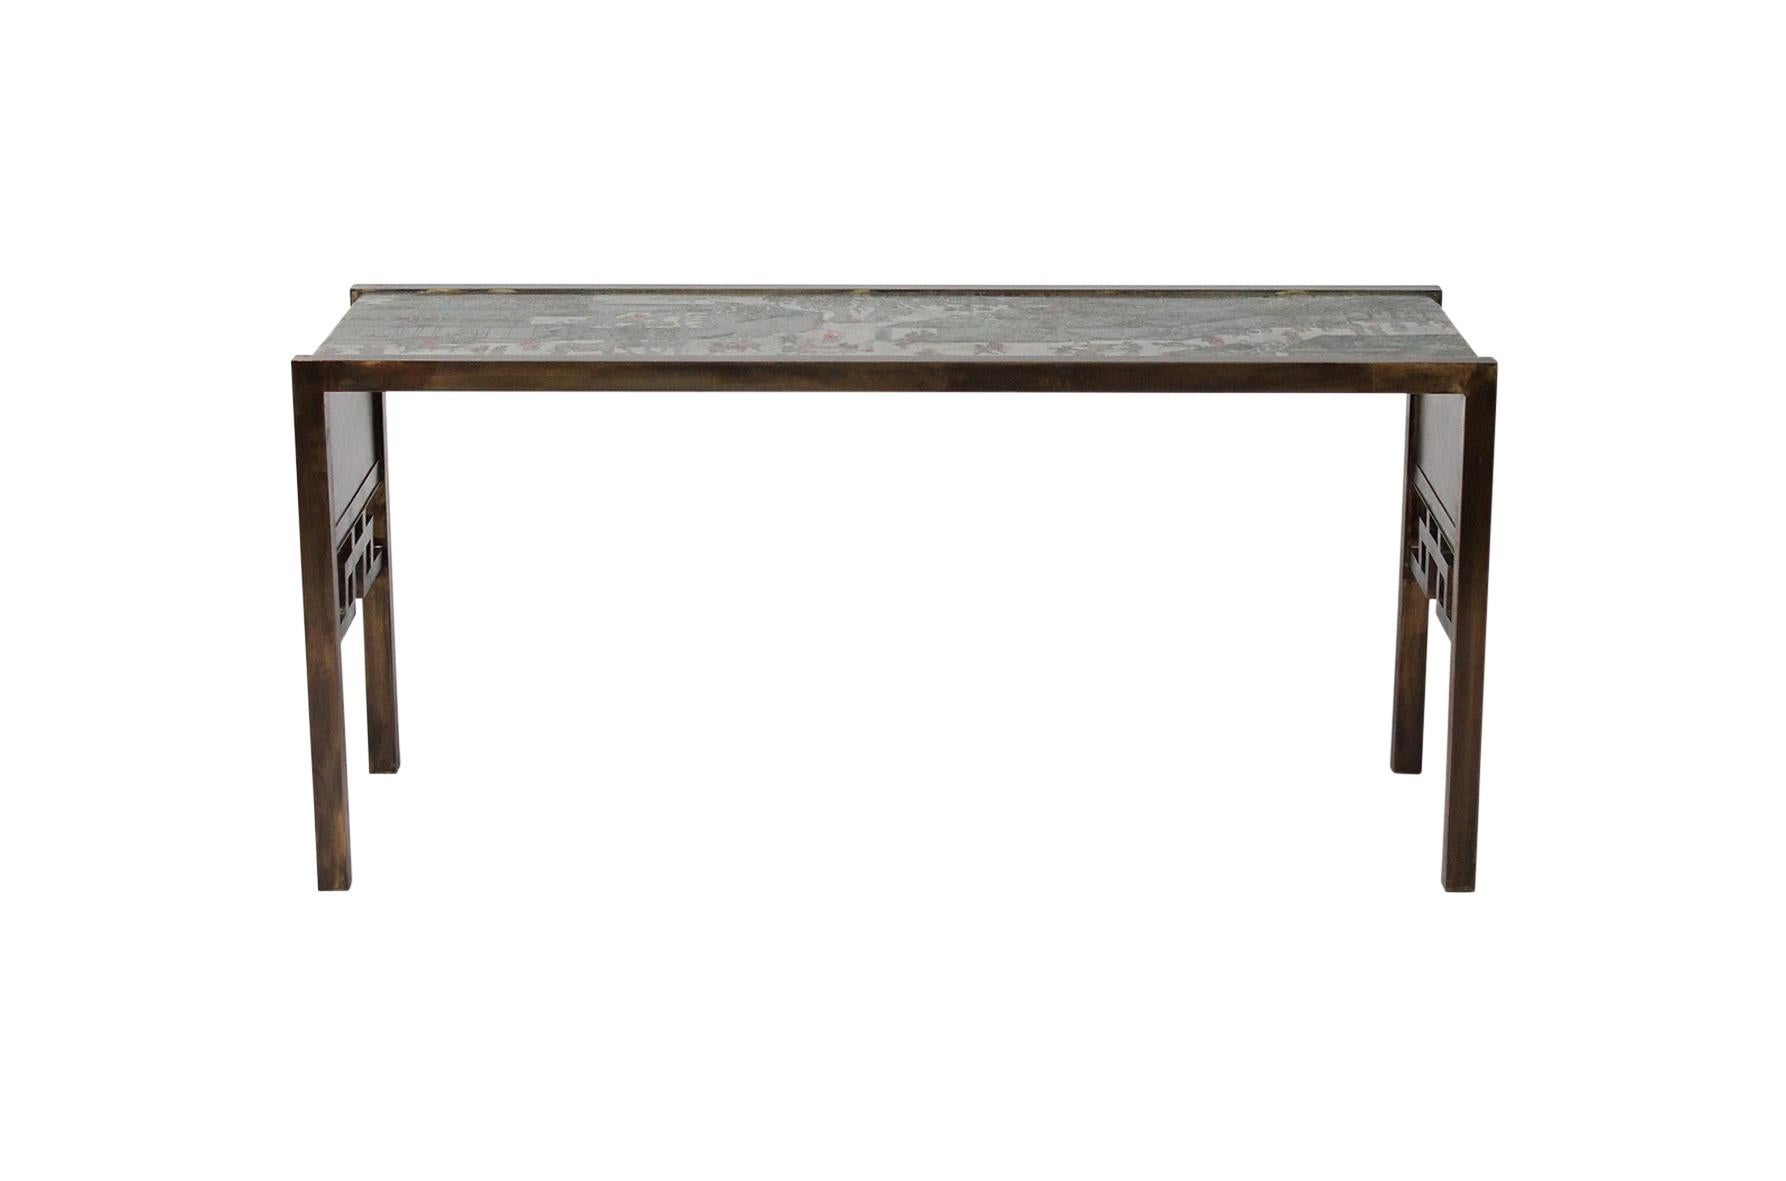 Philip and Kelvin LaVerne “Festival” console table. Etched and patinated bronze and pewter retains strong color and definition in decoration. Signed with raised signature within design and paper label to underside.